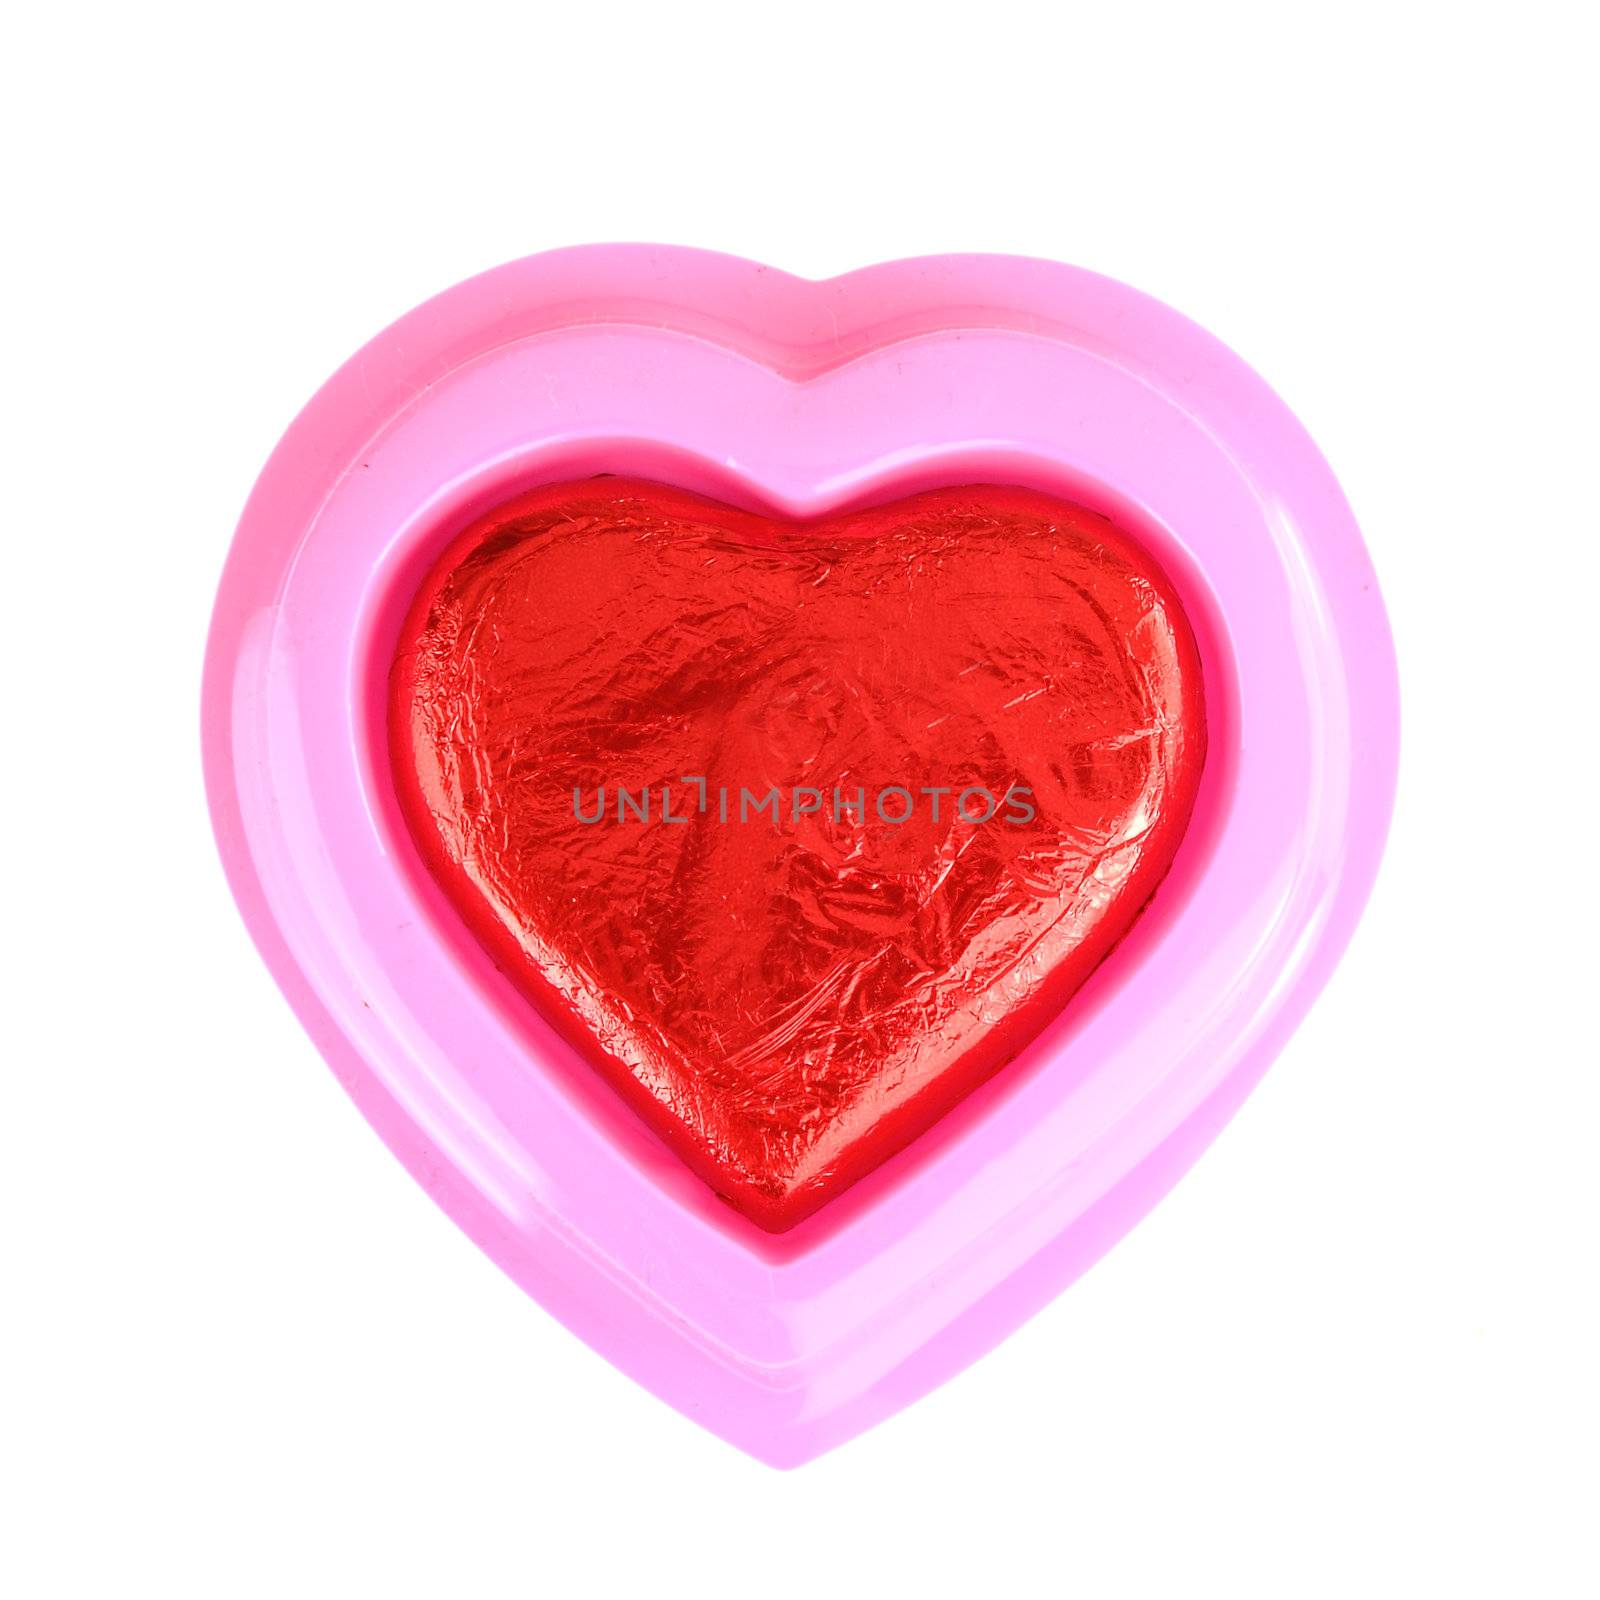 Red Foil wrapped chocolate hearts